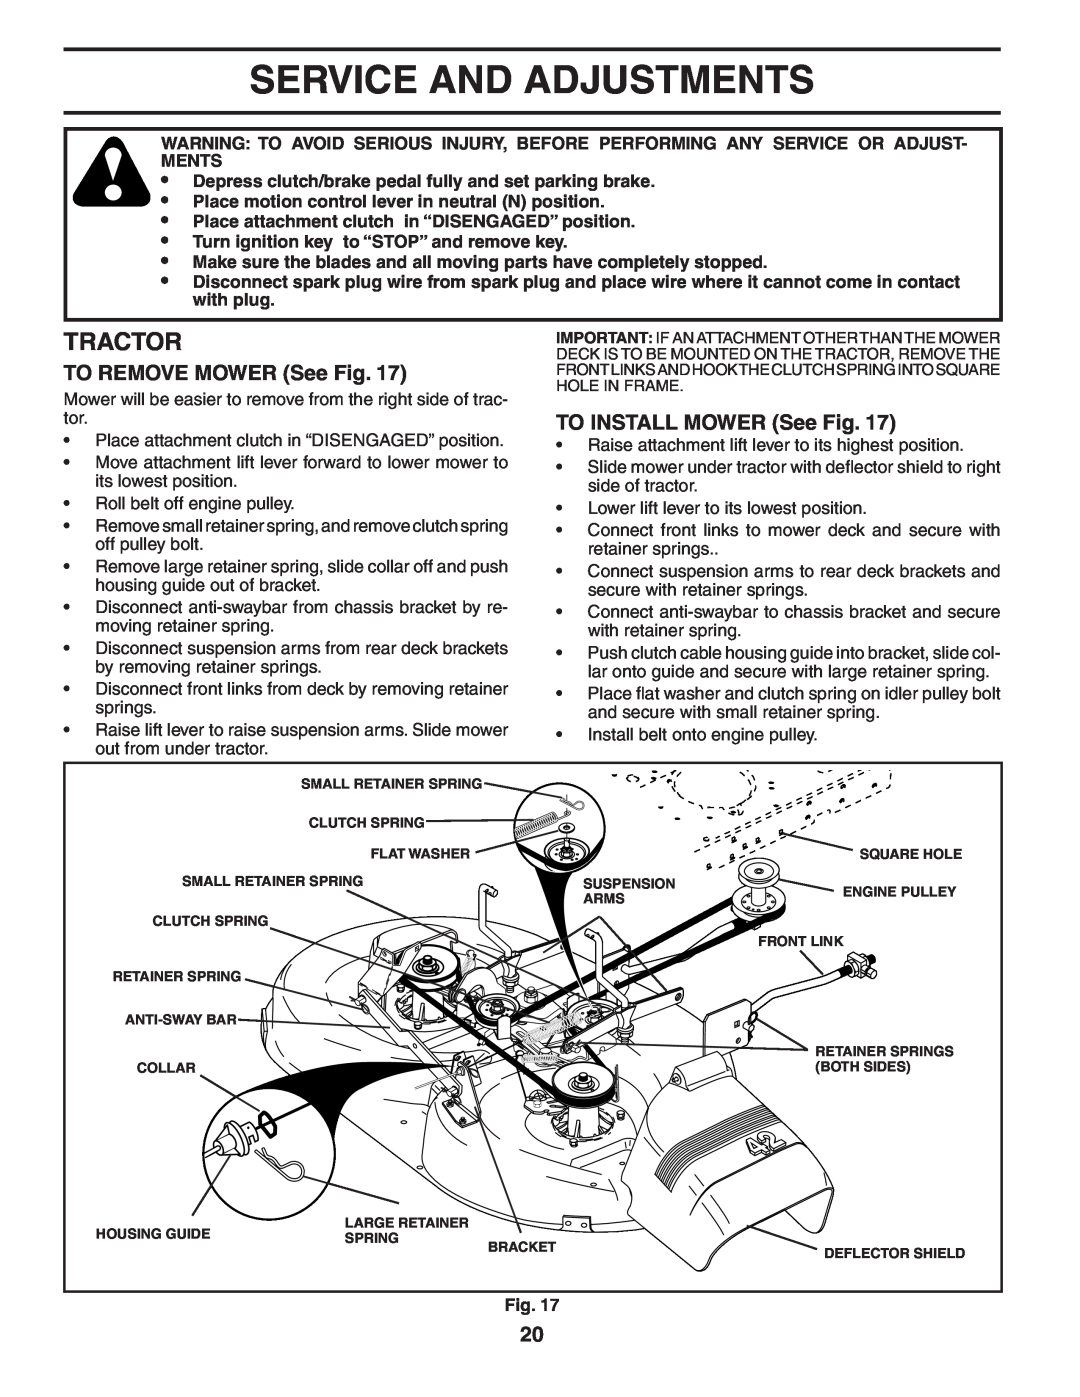 Poulan 188781 owner manual Service And Adjustments, TO REMOVE MOWER See Fig, TO INSTALL MOWER See Fig, Tractor 